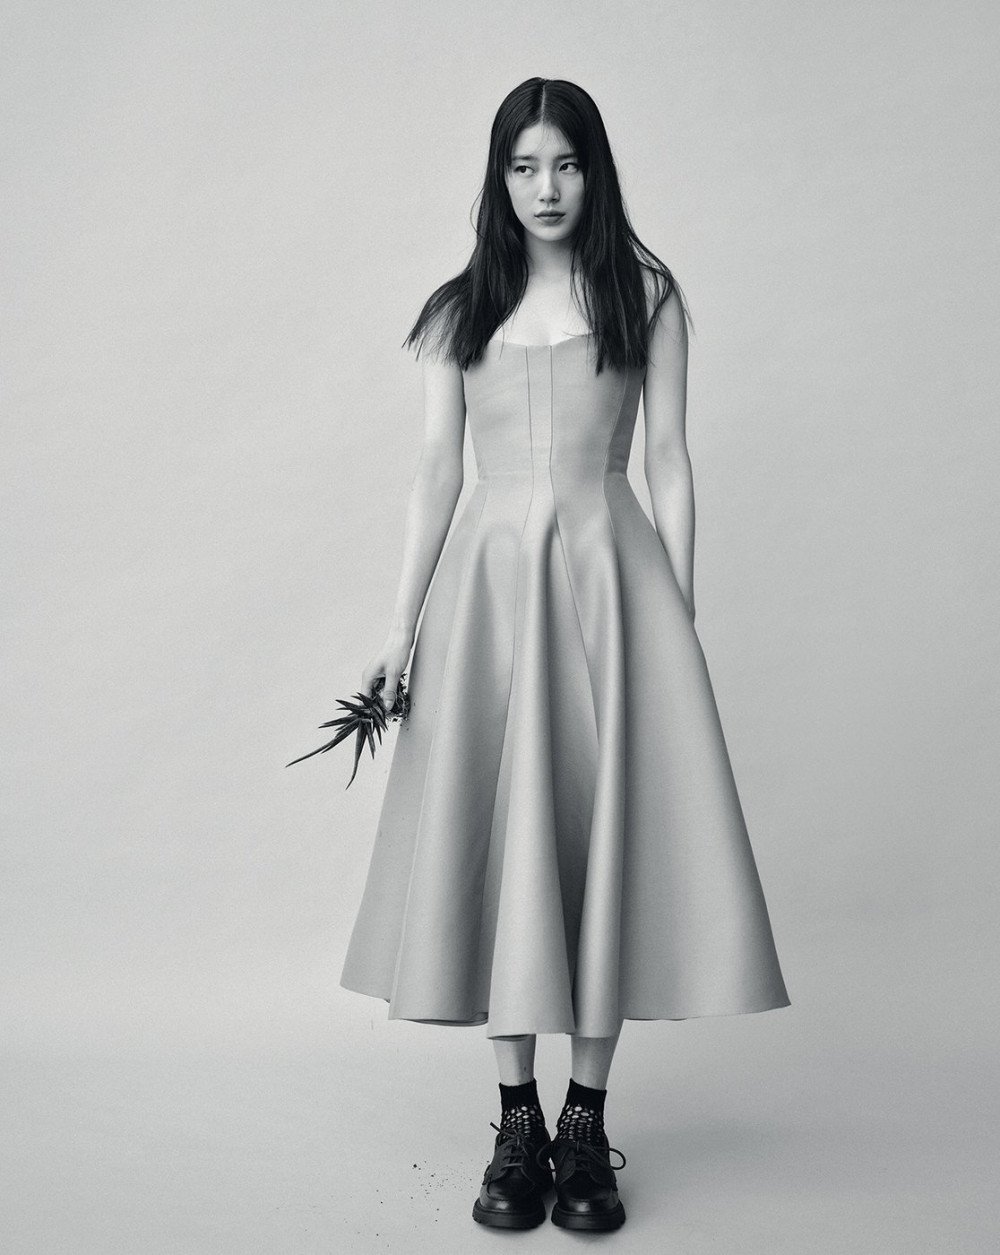 suzy-turns-into-fashion-icon-in-vogue-3